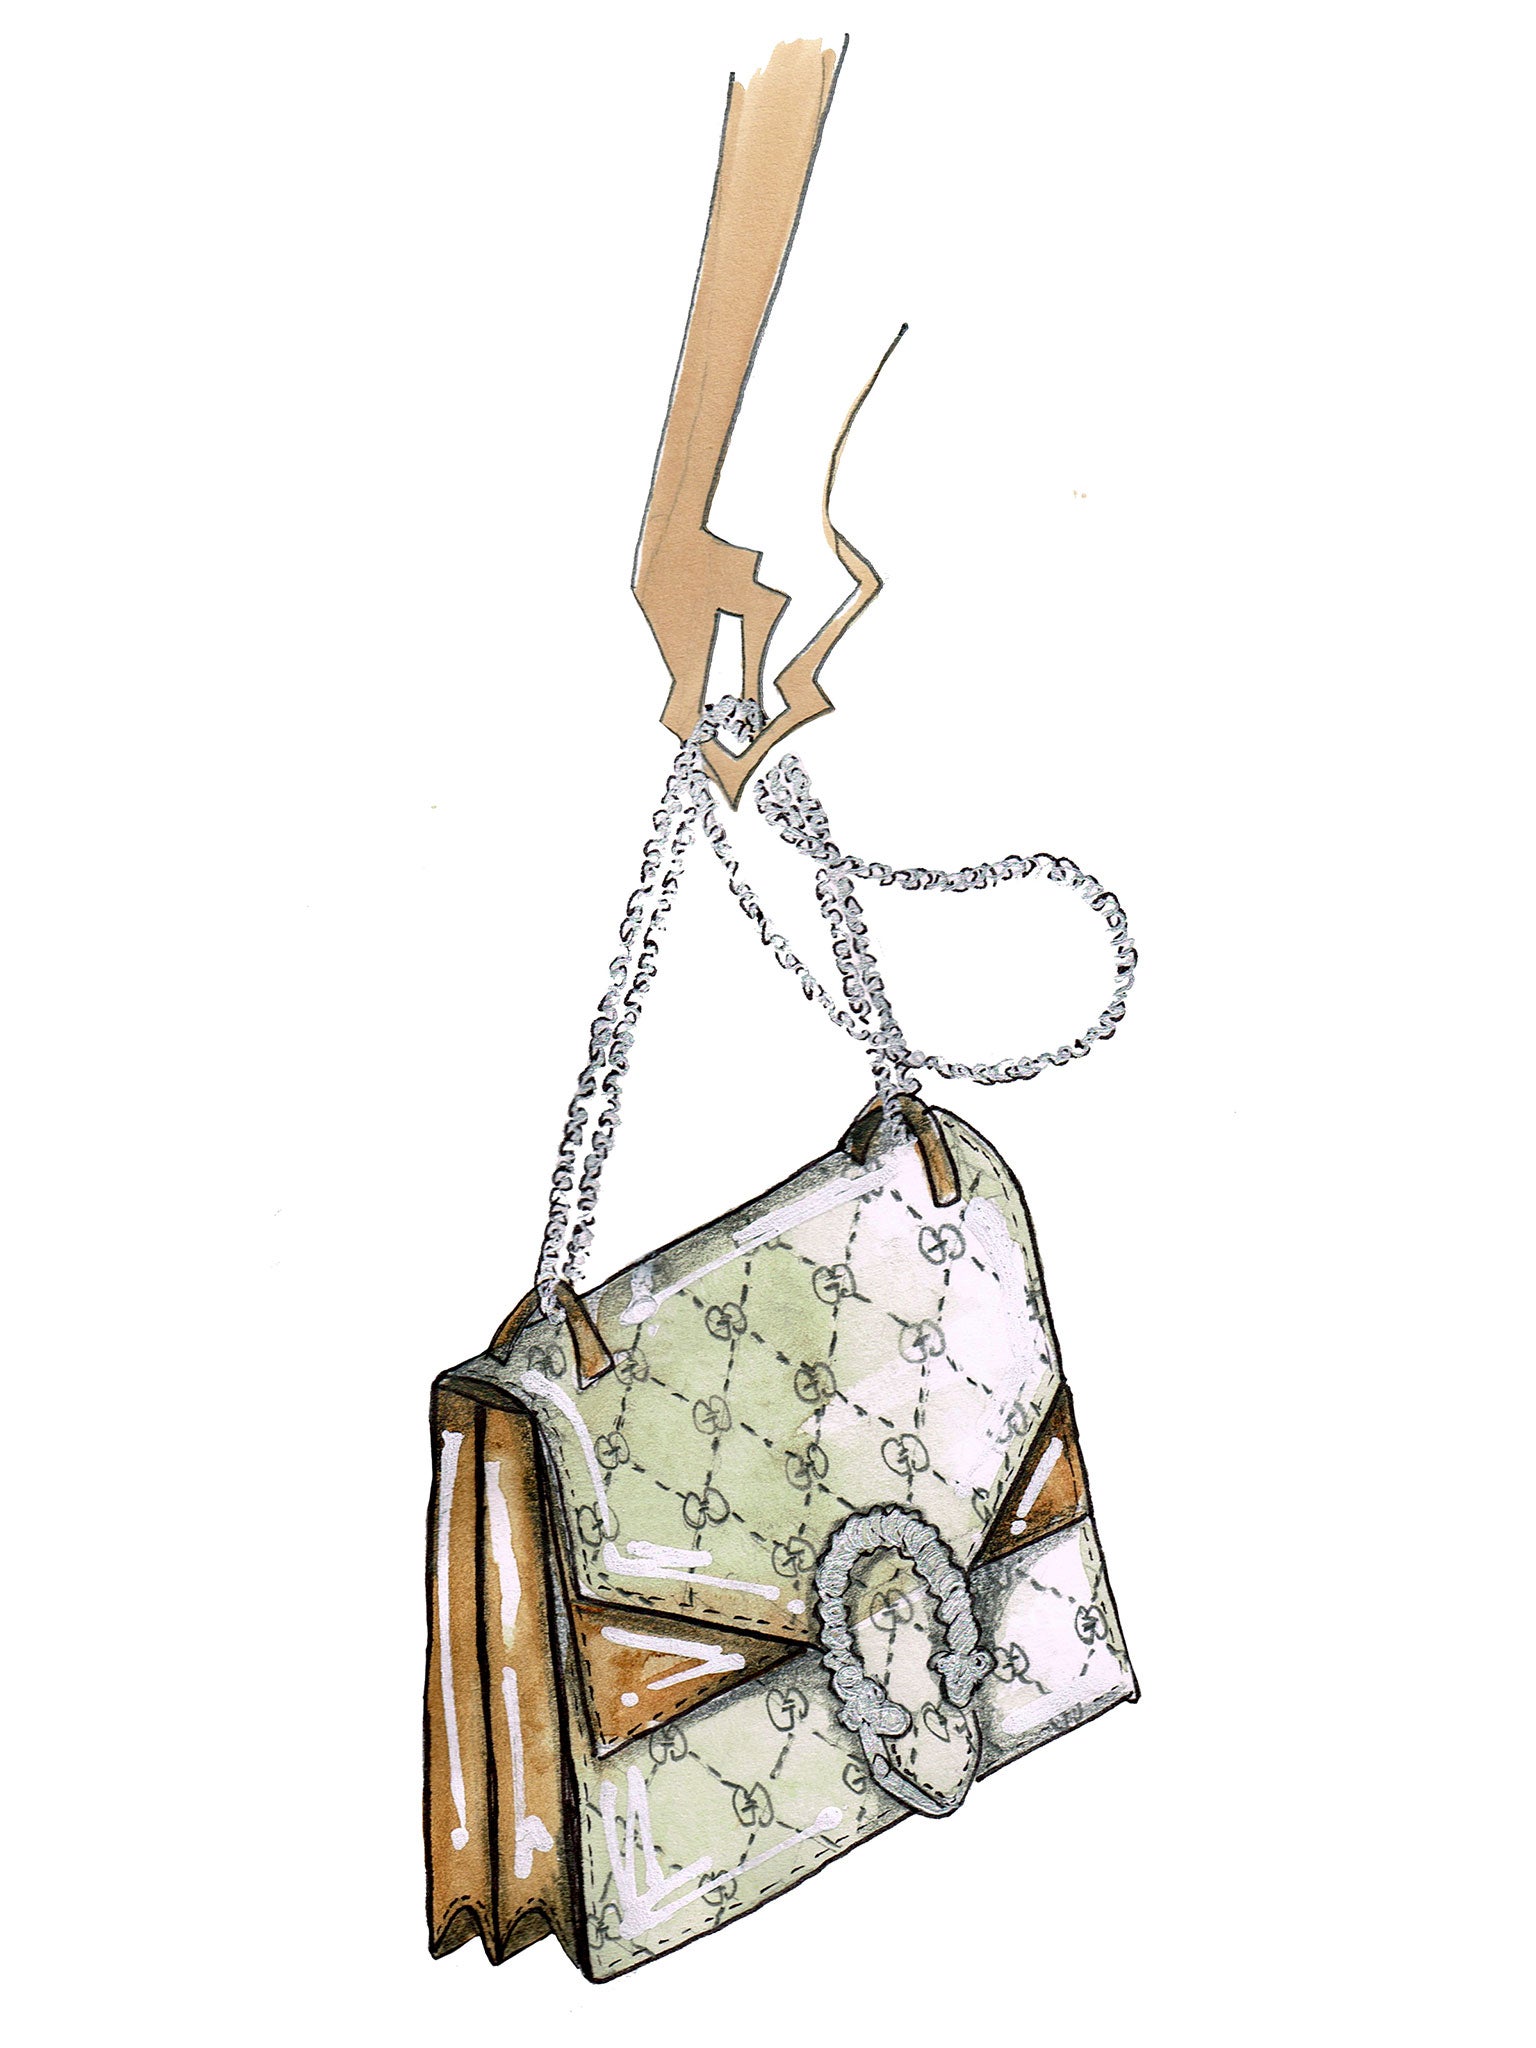 The best winter handbags: From Louis Vuitton to Gucci via Prada and Dior, The Independent